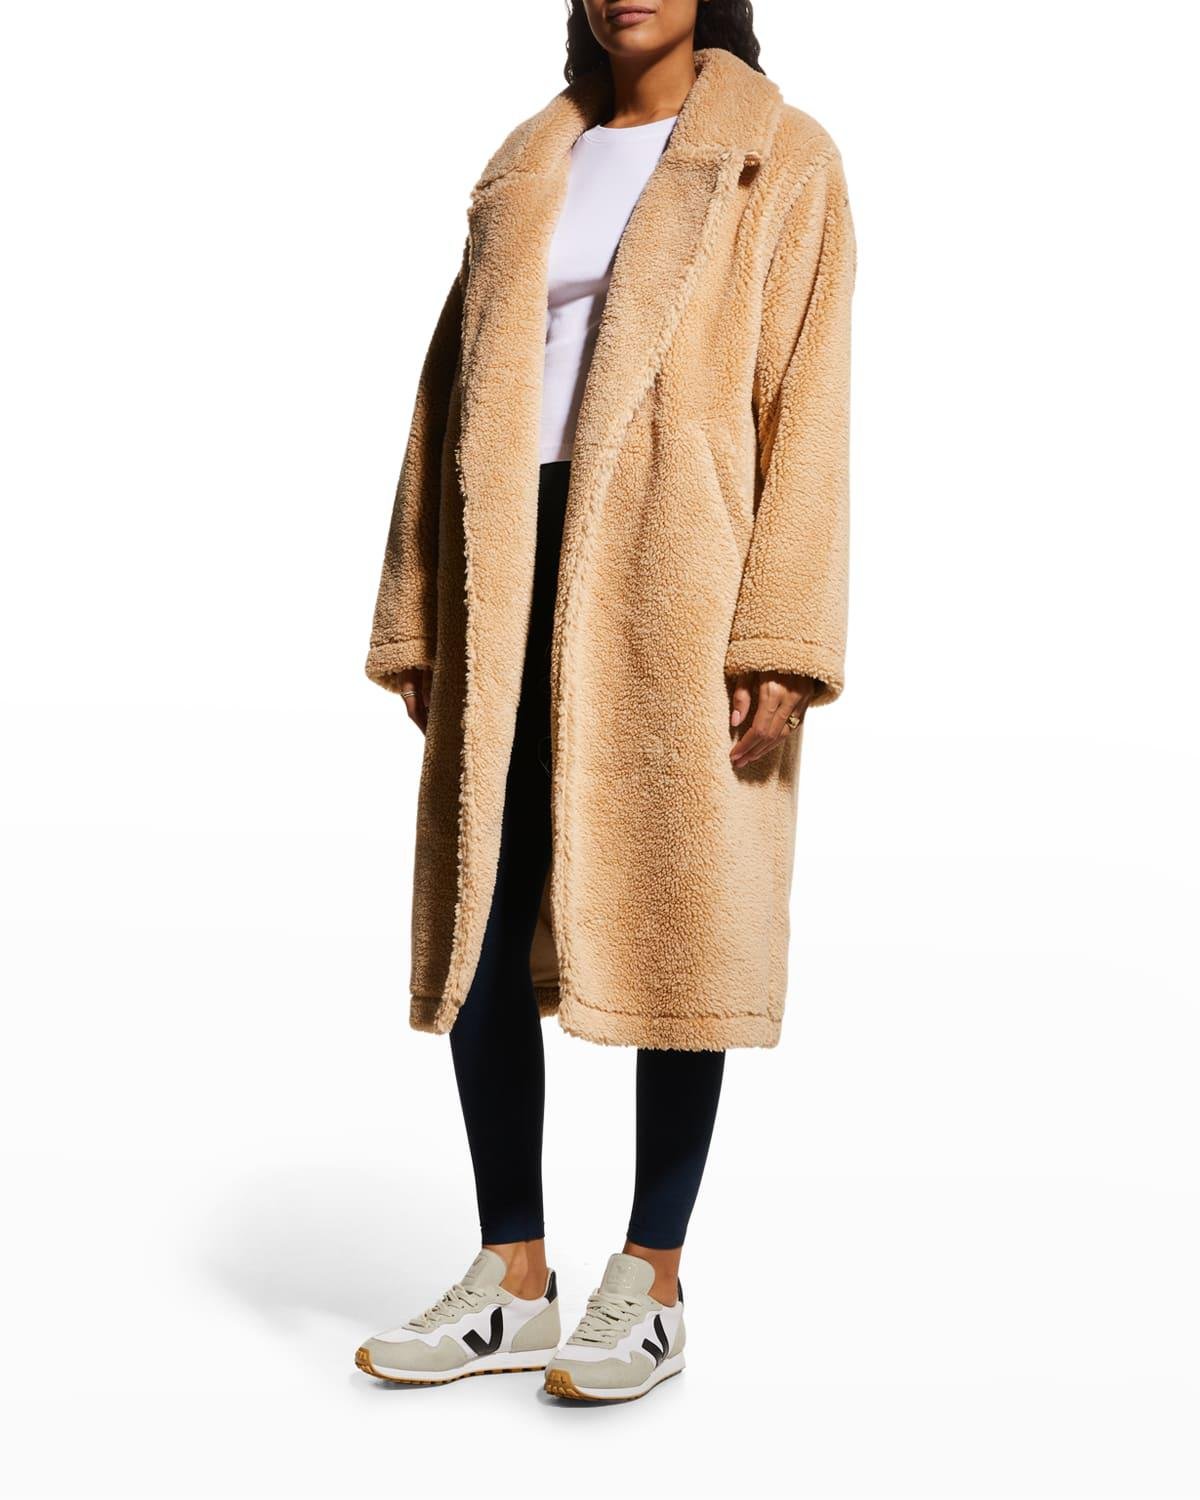 Oversized Faux-Fur Trench Coat by ALO YOGA | jellibeans